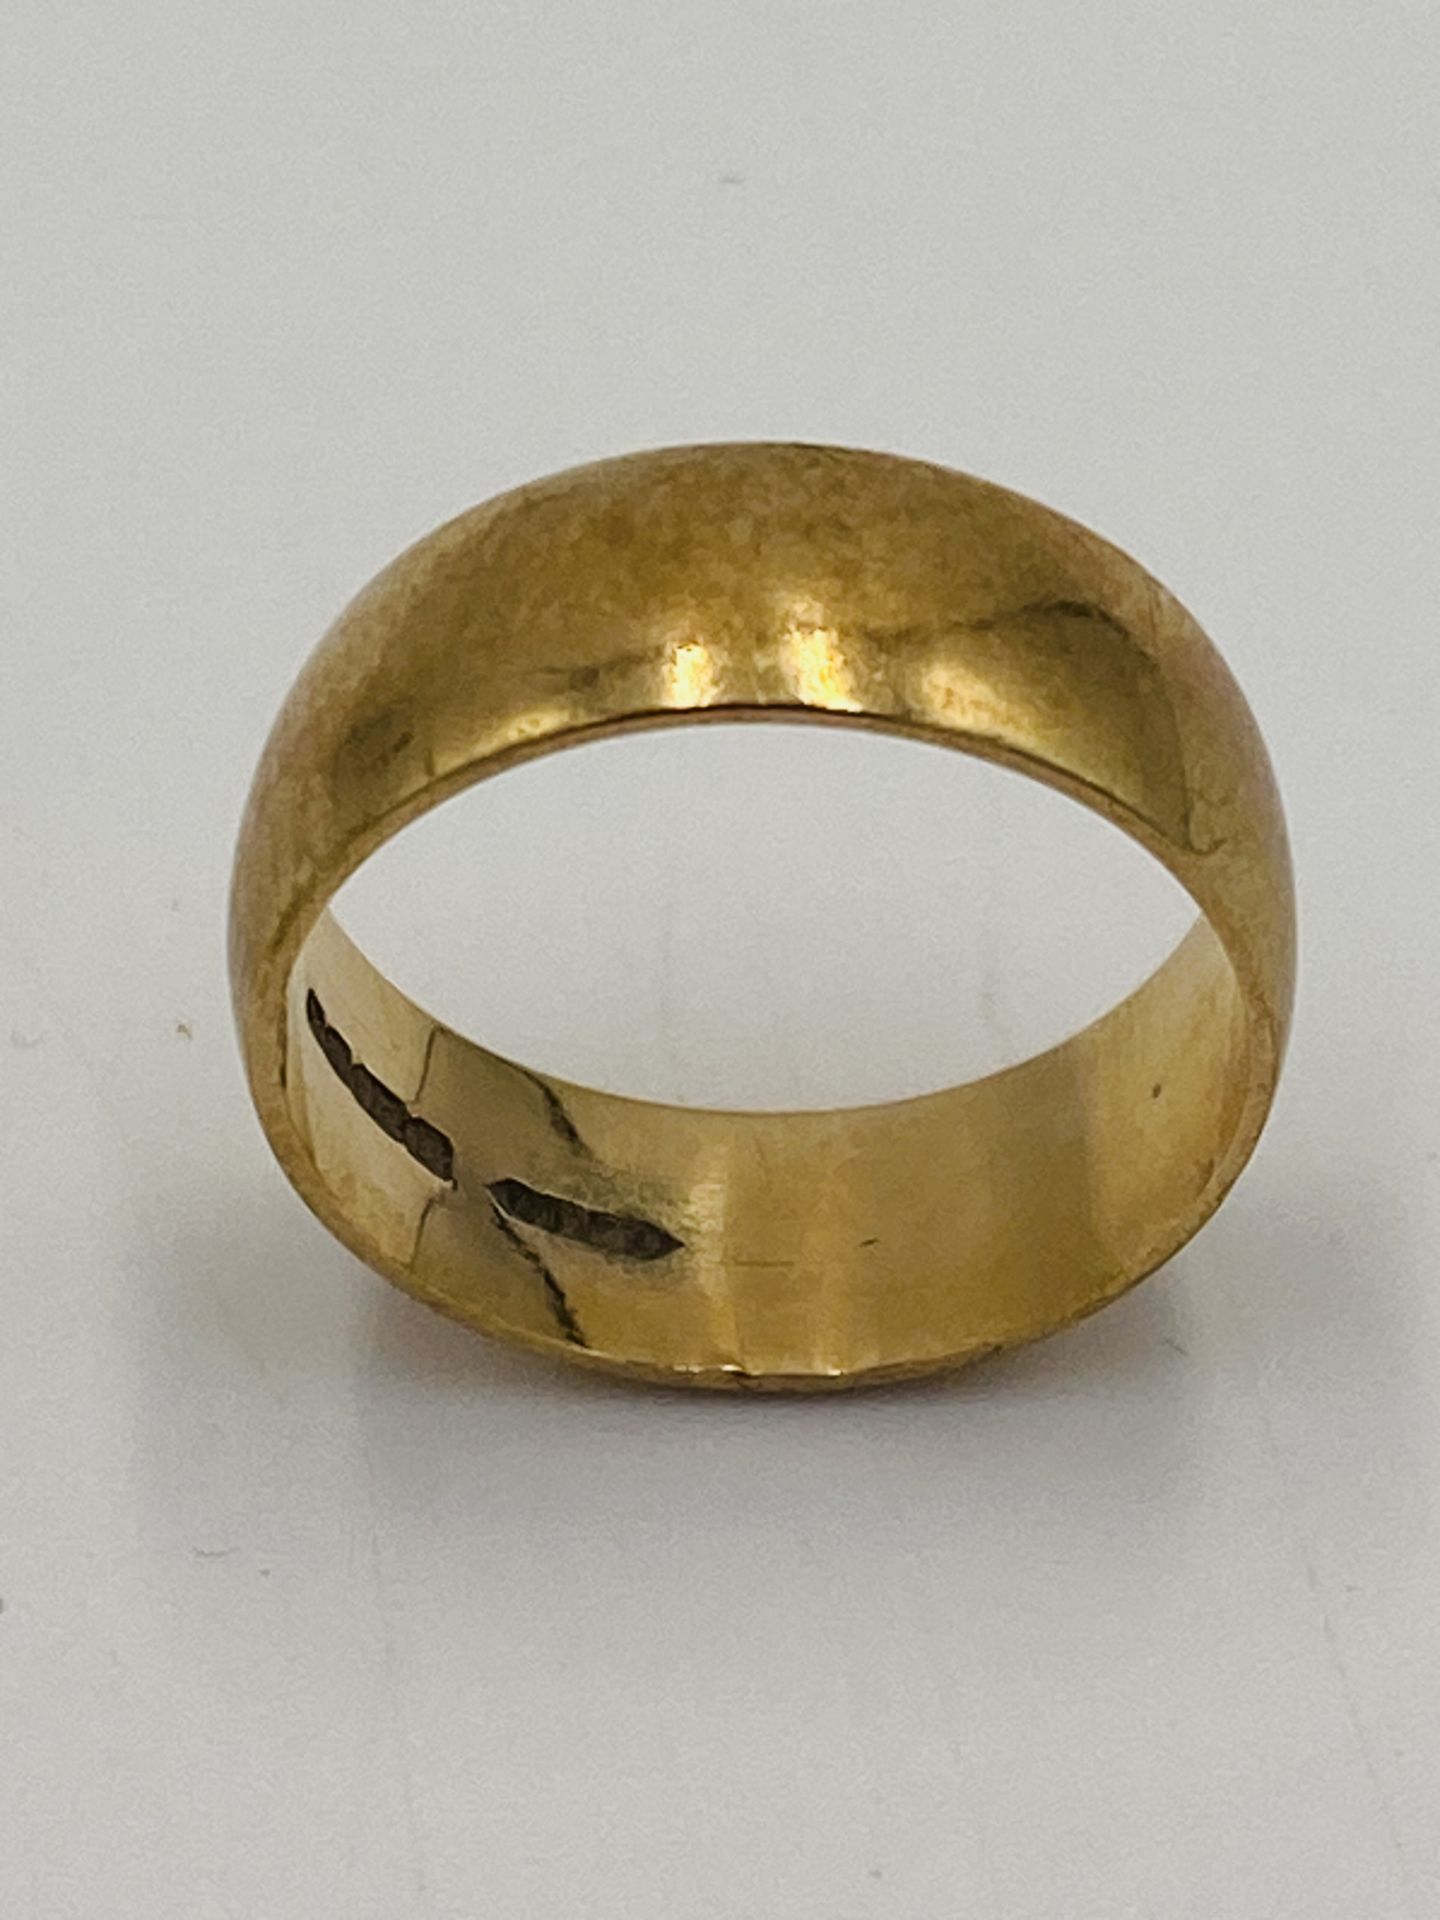 9ct gold band - Image 5 of 5